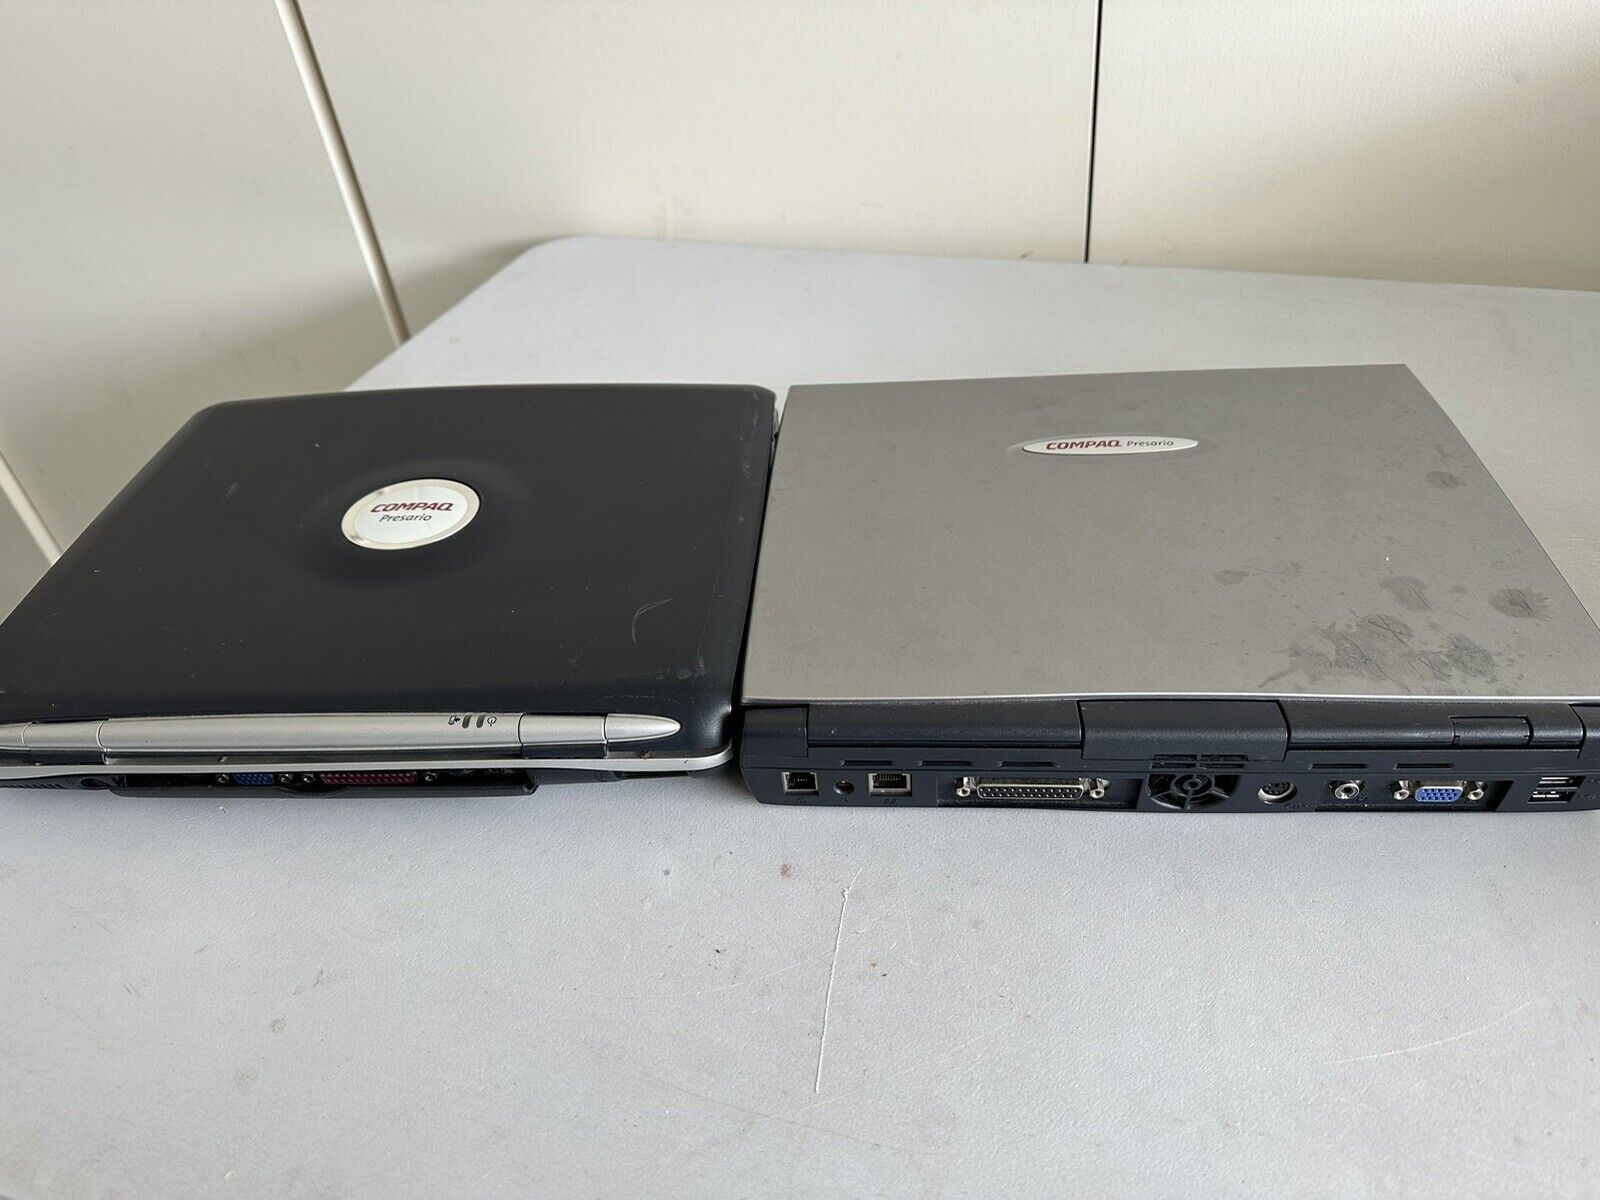 Lot Of 2 Compaq Presario Laptops. 1 Model 700 And 1 Model 1200. Used-Parts.